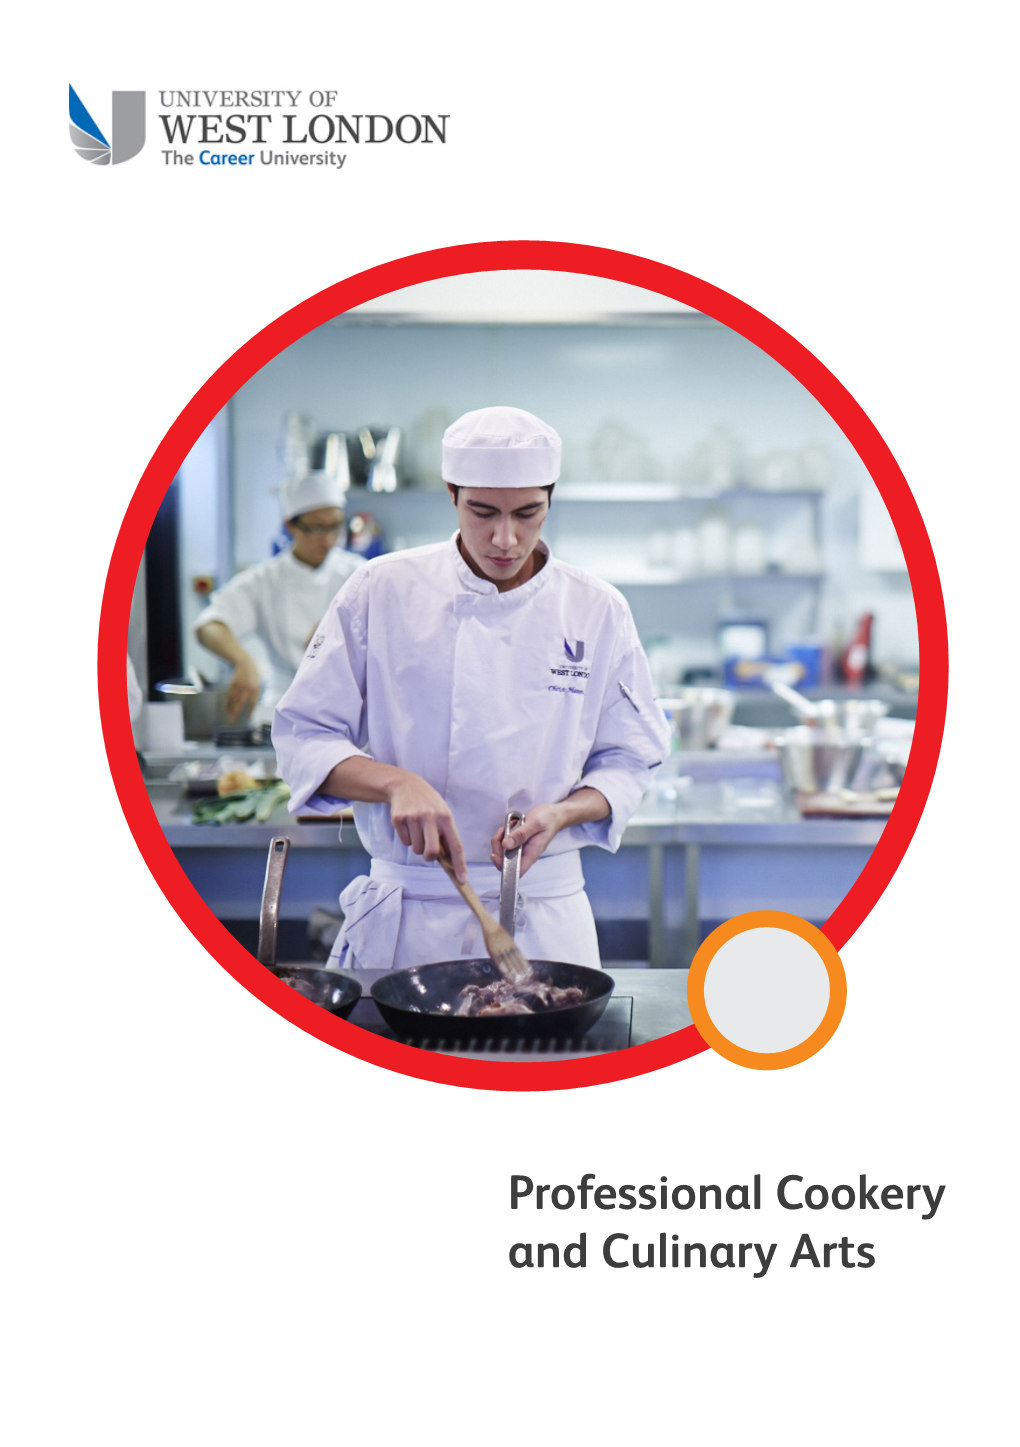 Professional Cookery and Culinary Arts